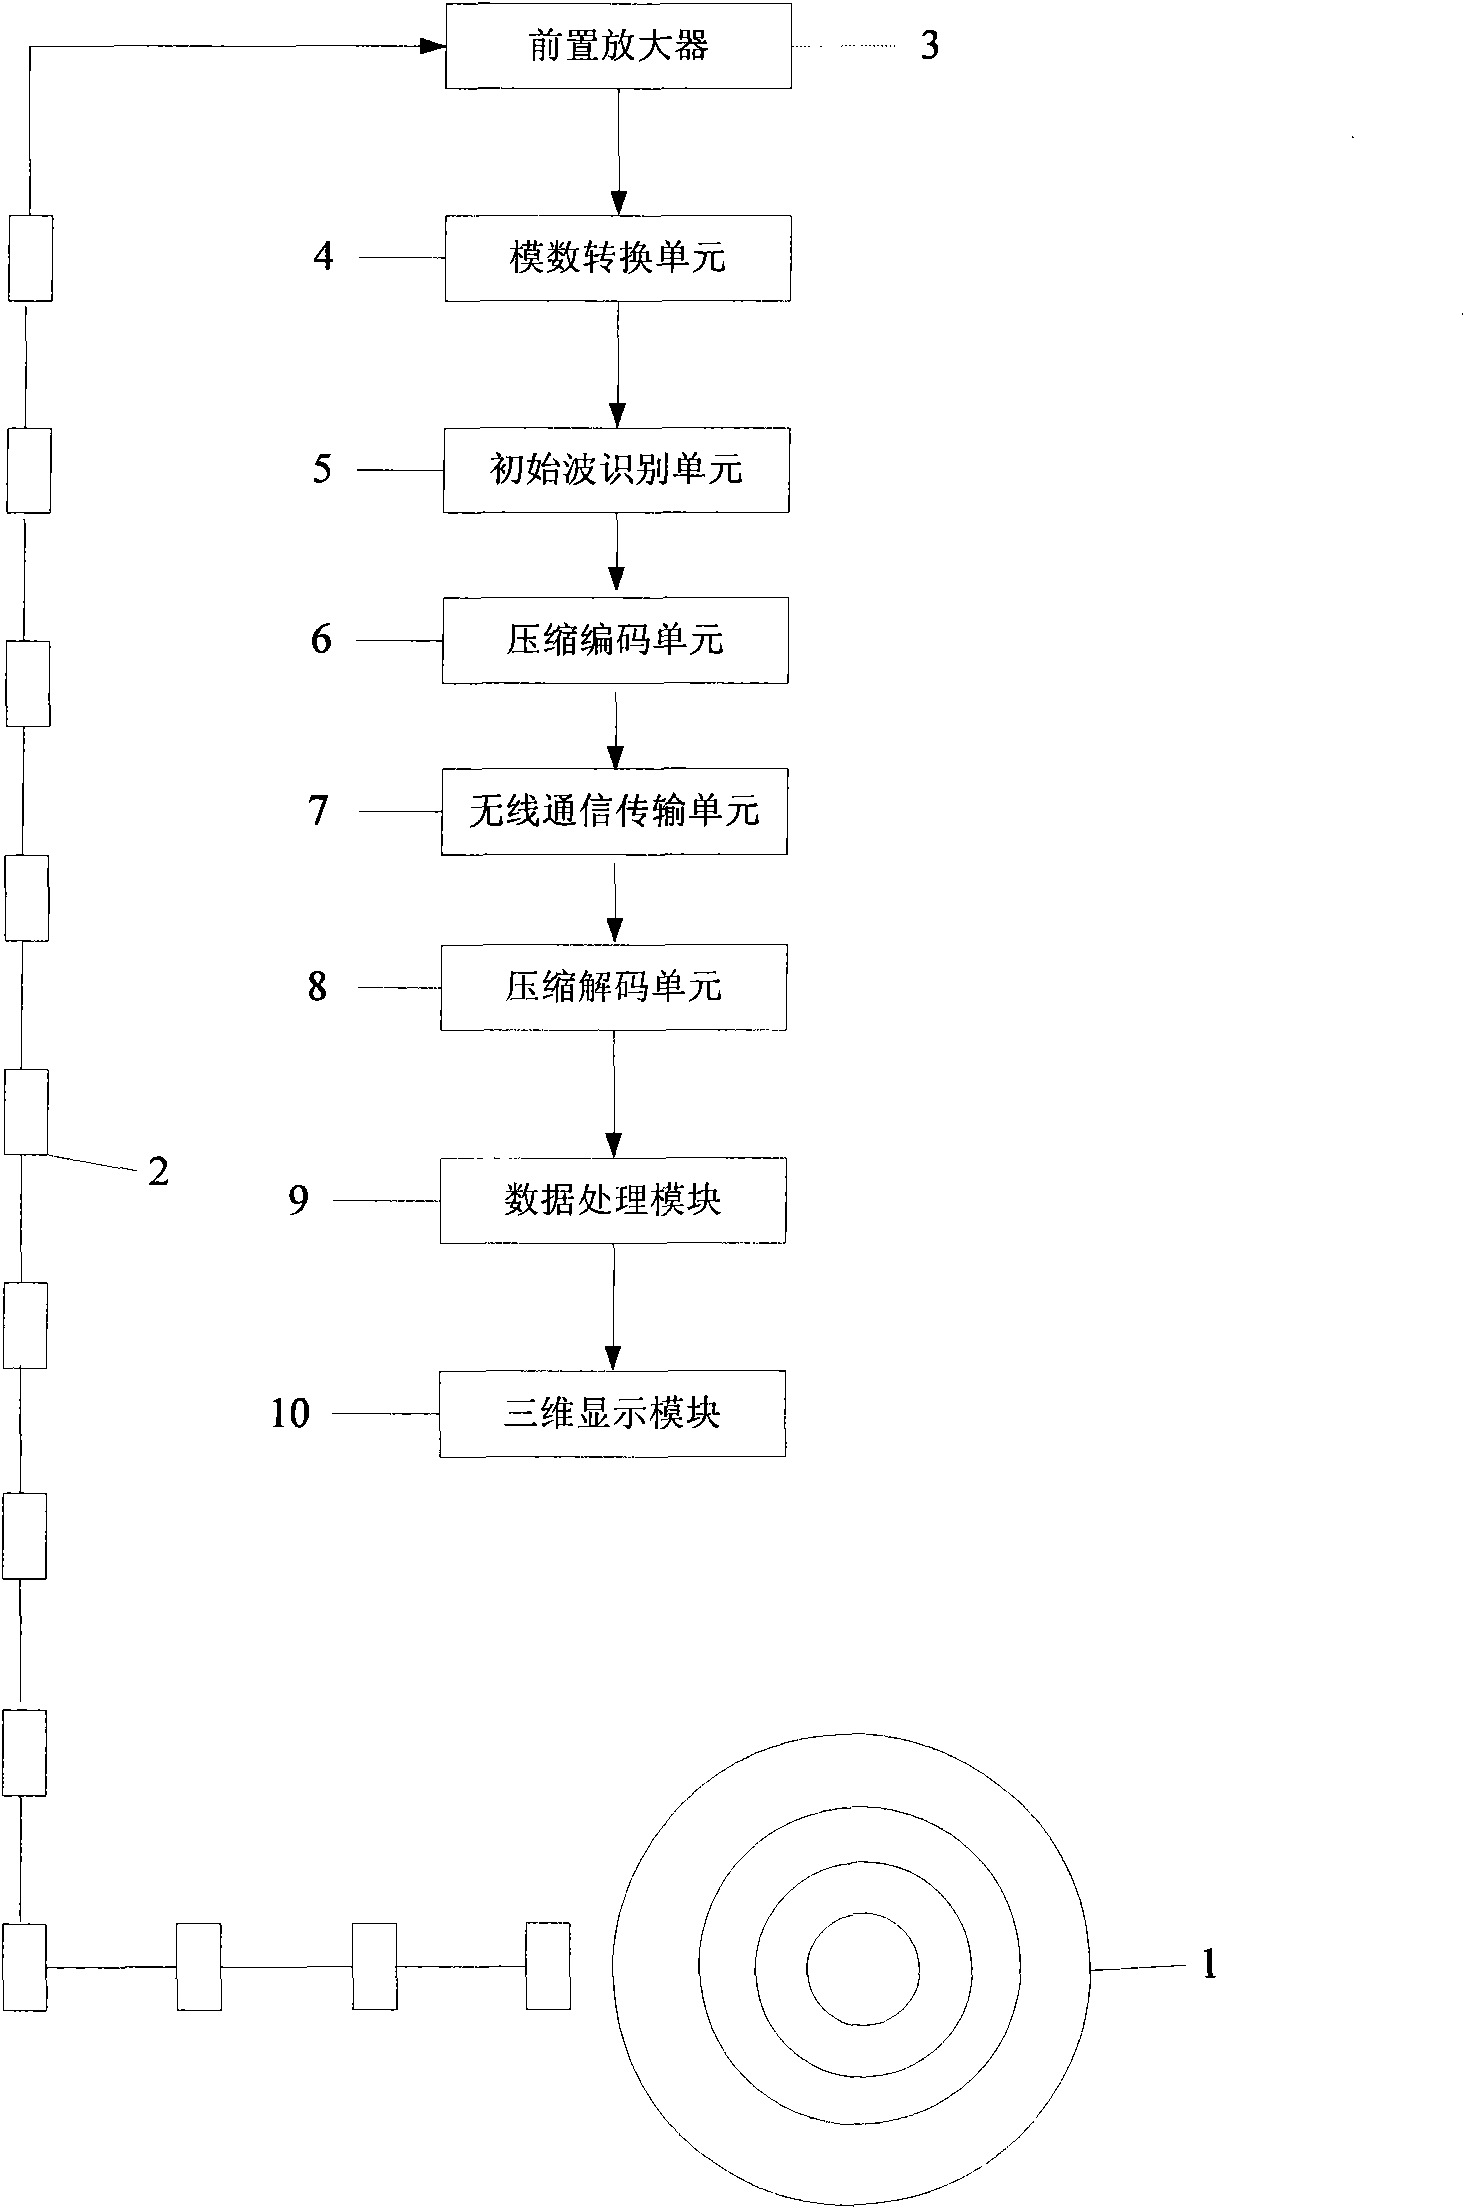 Micro-earthquake monitoring system and method